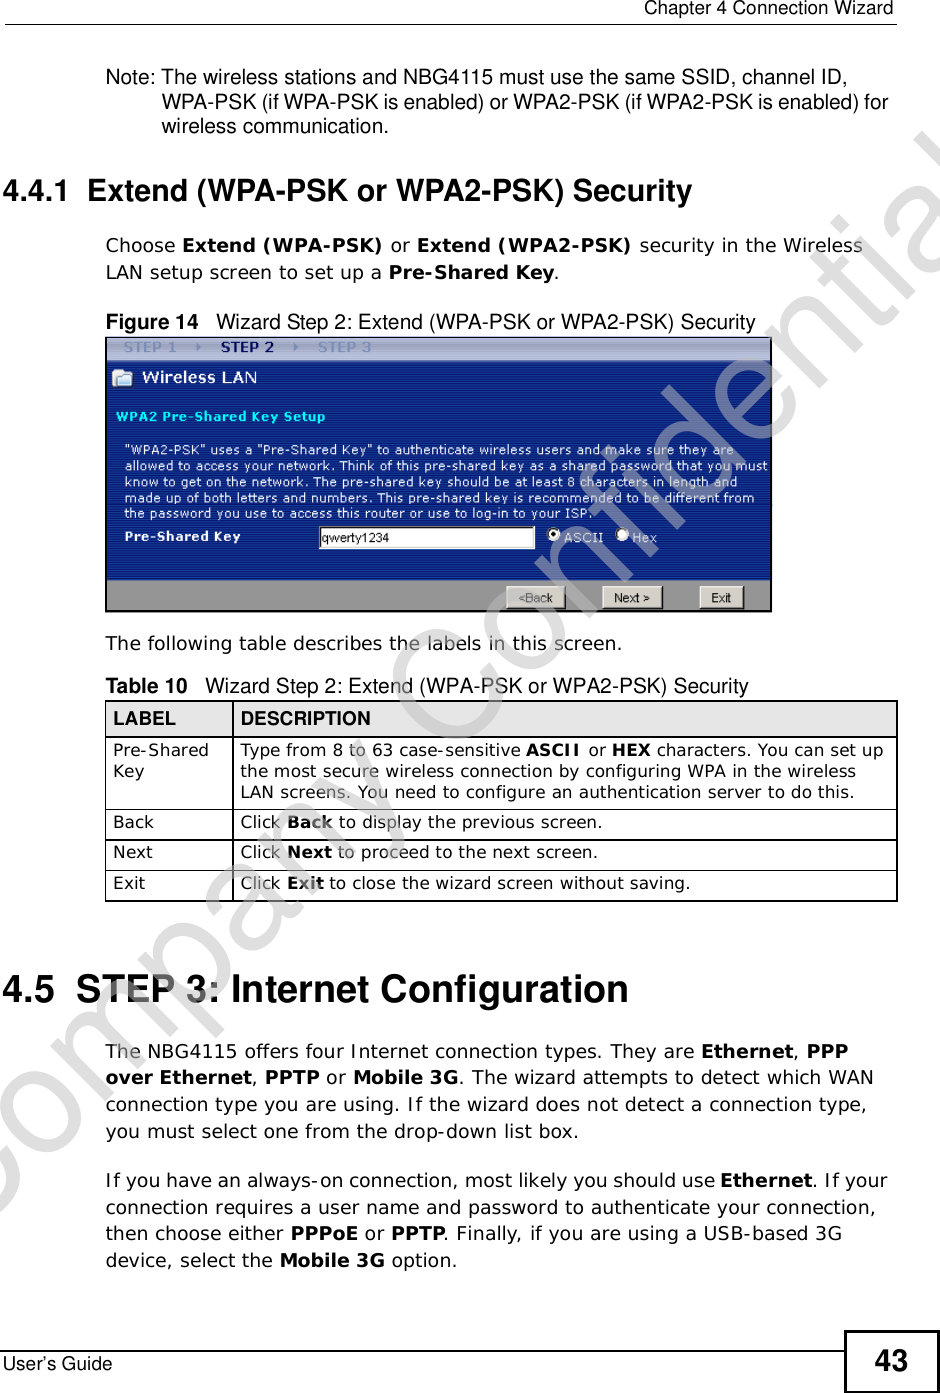  Chapter 4Connection WizardUser’s Guide 43Note: The wireless stations and NBG4115 must use the same SSID, channel ID, WPA-PSK (if WPA-PSK is enabled) or WPA2-PSK (if WPA2-PSK is enabled) for wireless communication.4.4.1  Extend (WPA-PSK or WPA2-PSK) SecurityChoose Extend (WPA-PSK) or Extend (WPA2-PSK) security in the Wireless LAN setup screen to set up a Pre-Shared Key.Figure 14   Wizard Step 2: Extend (WPA-PSK or WPA2-PSK) SecurityThe following table describes the labels in this screen. 4.5  STEP 3: Internet ConfigurationThe NBG4115 offers four Internet connection types. They are Ethernet,PPPover Ethernet, PPTP or Mobile 3G. The wizard attempts to detect which WAN connection type you are using. If the wizard does not detect a connection type, you must select one from the drop-down list box. If you have an always-on connection, most likely you should use Ethernet. If your connection requires a user name and password to authenticate your connection, then choose either PPPoE or PPTP. Finally, if you are using a USB-based 3G device, select the Mobile 3G option.Table 10   Wizard Step 2: Extend (WPA-PSK or WPA2-PSK) SecurityLABEL DESCRIPTIONPre-SharedKey Type from 8 to 63 case-sensitive ASCII or HEX characters. You can set up the most secure wireless connection by configuring WPA in the wireless LAN screens. You need to configure an authentication server to do this.Back Click Back to display the previous screen.Next Click Next to proceed to the next screen. Exit Click Exit to close the wizard screen without saving.Company Confidential